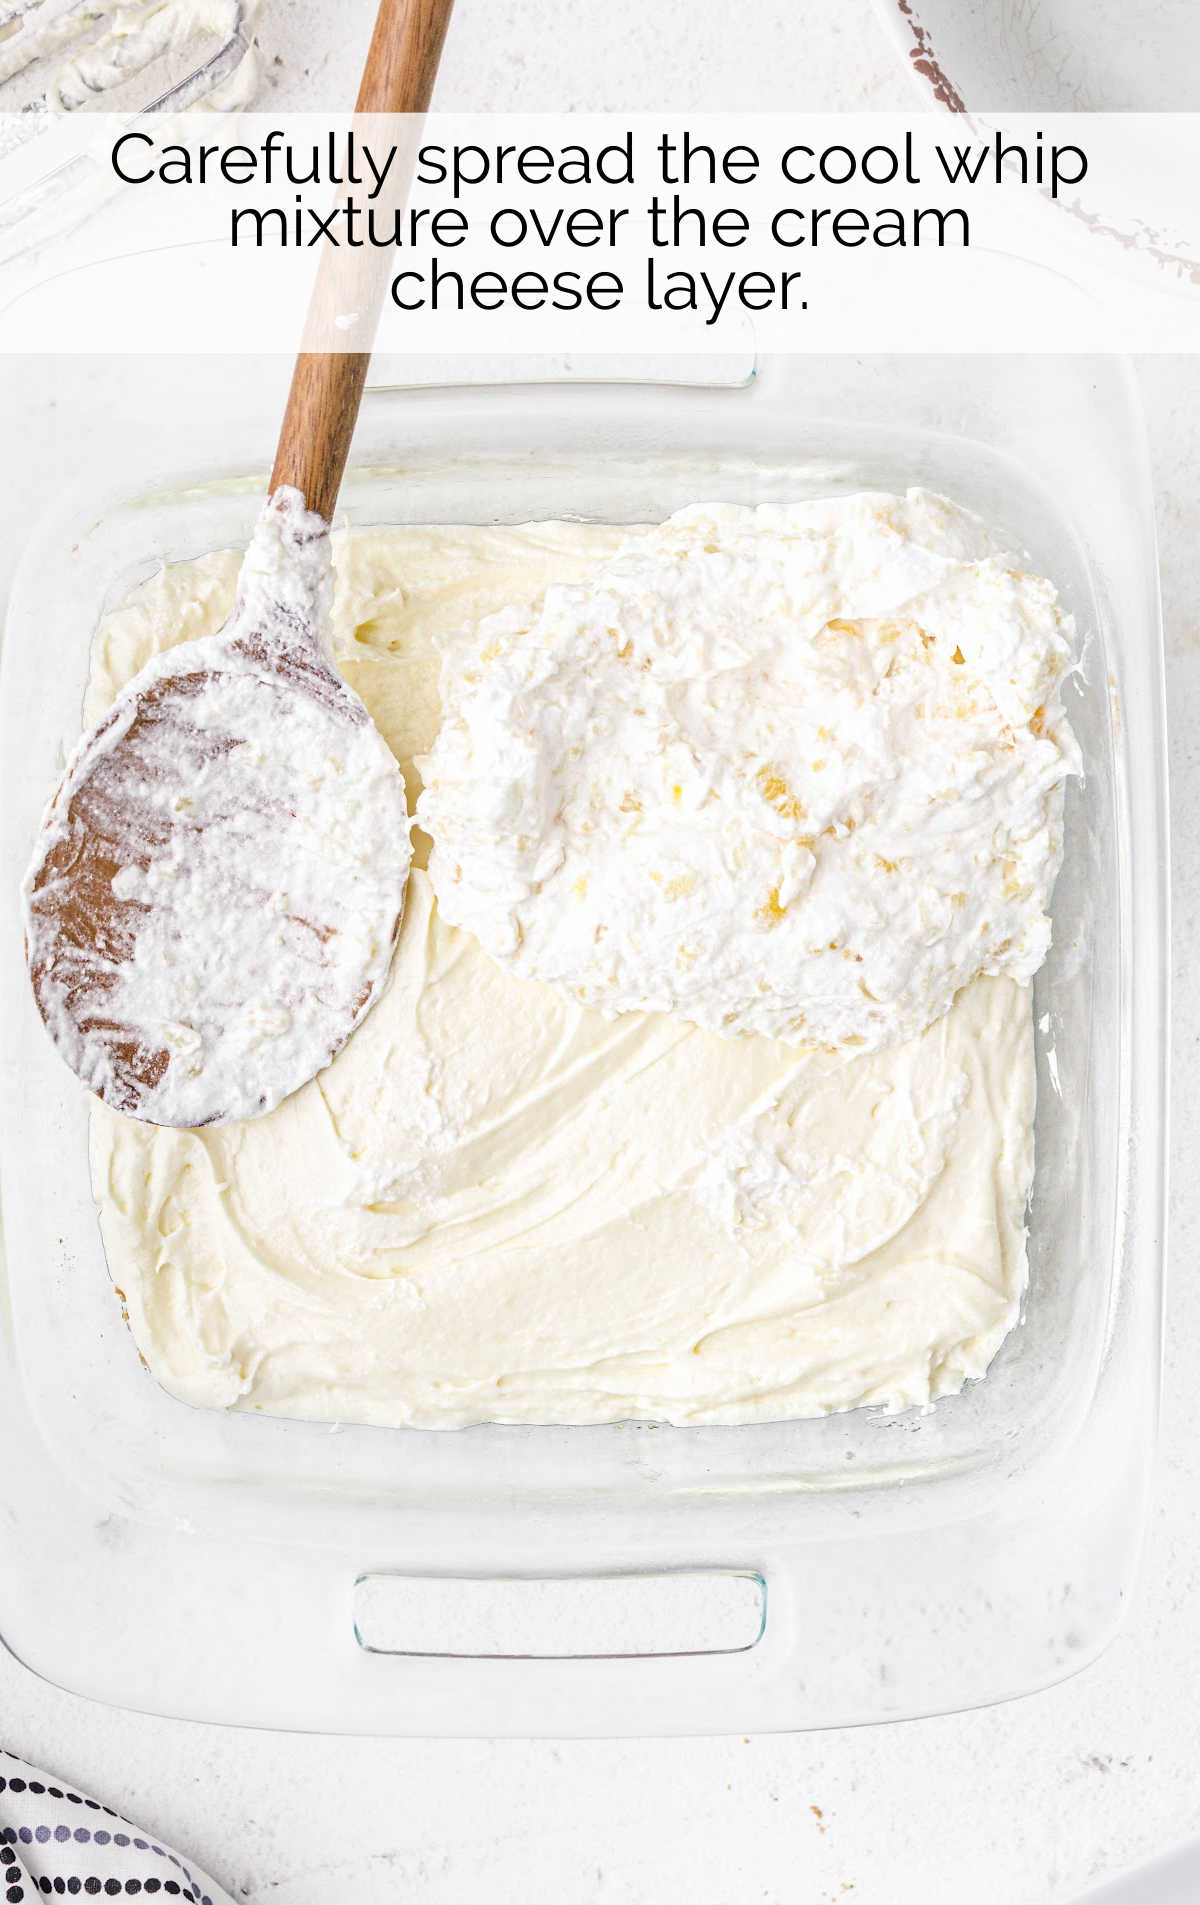 cool whip mixture spread over the cream cheese mixture